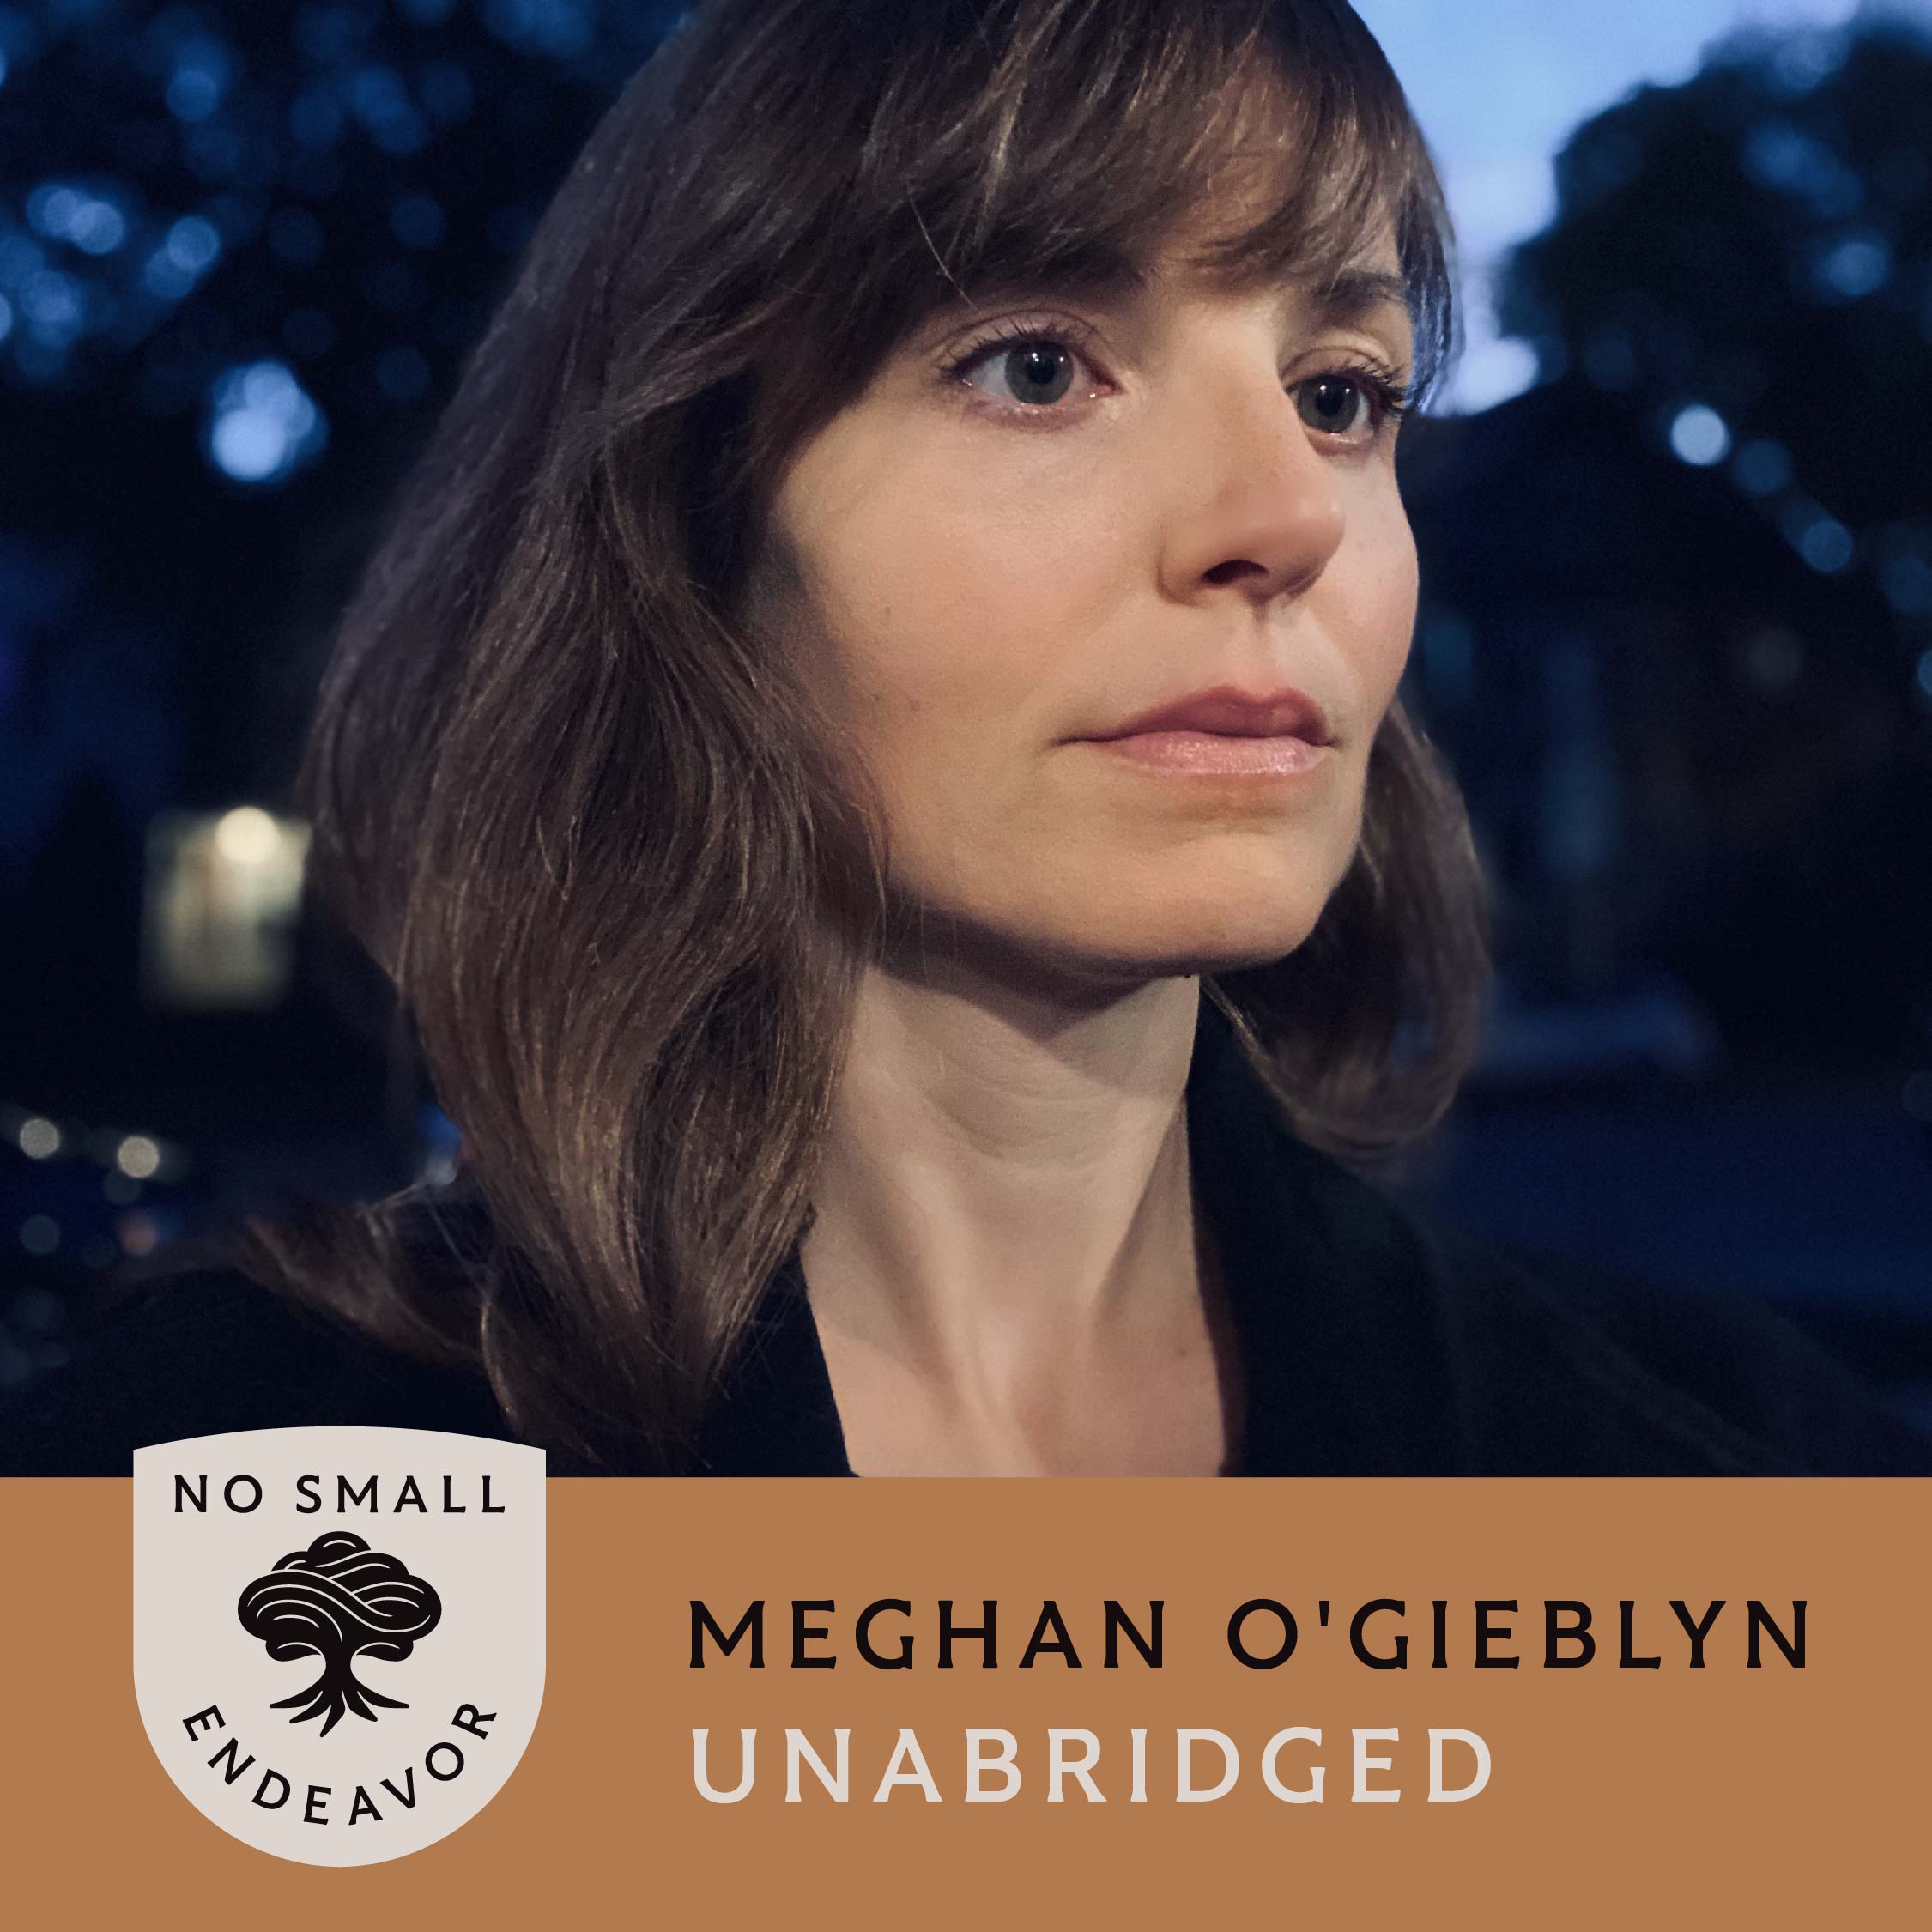 Thumbnail for "125: Unabridged Interview: Meghan O'Gieblyn".